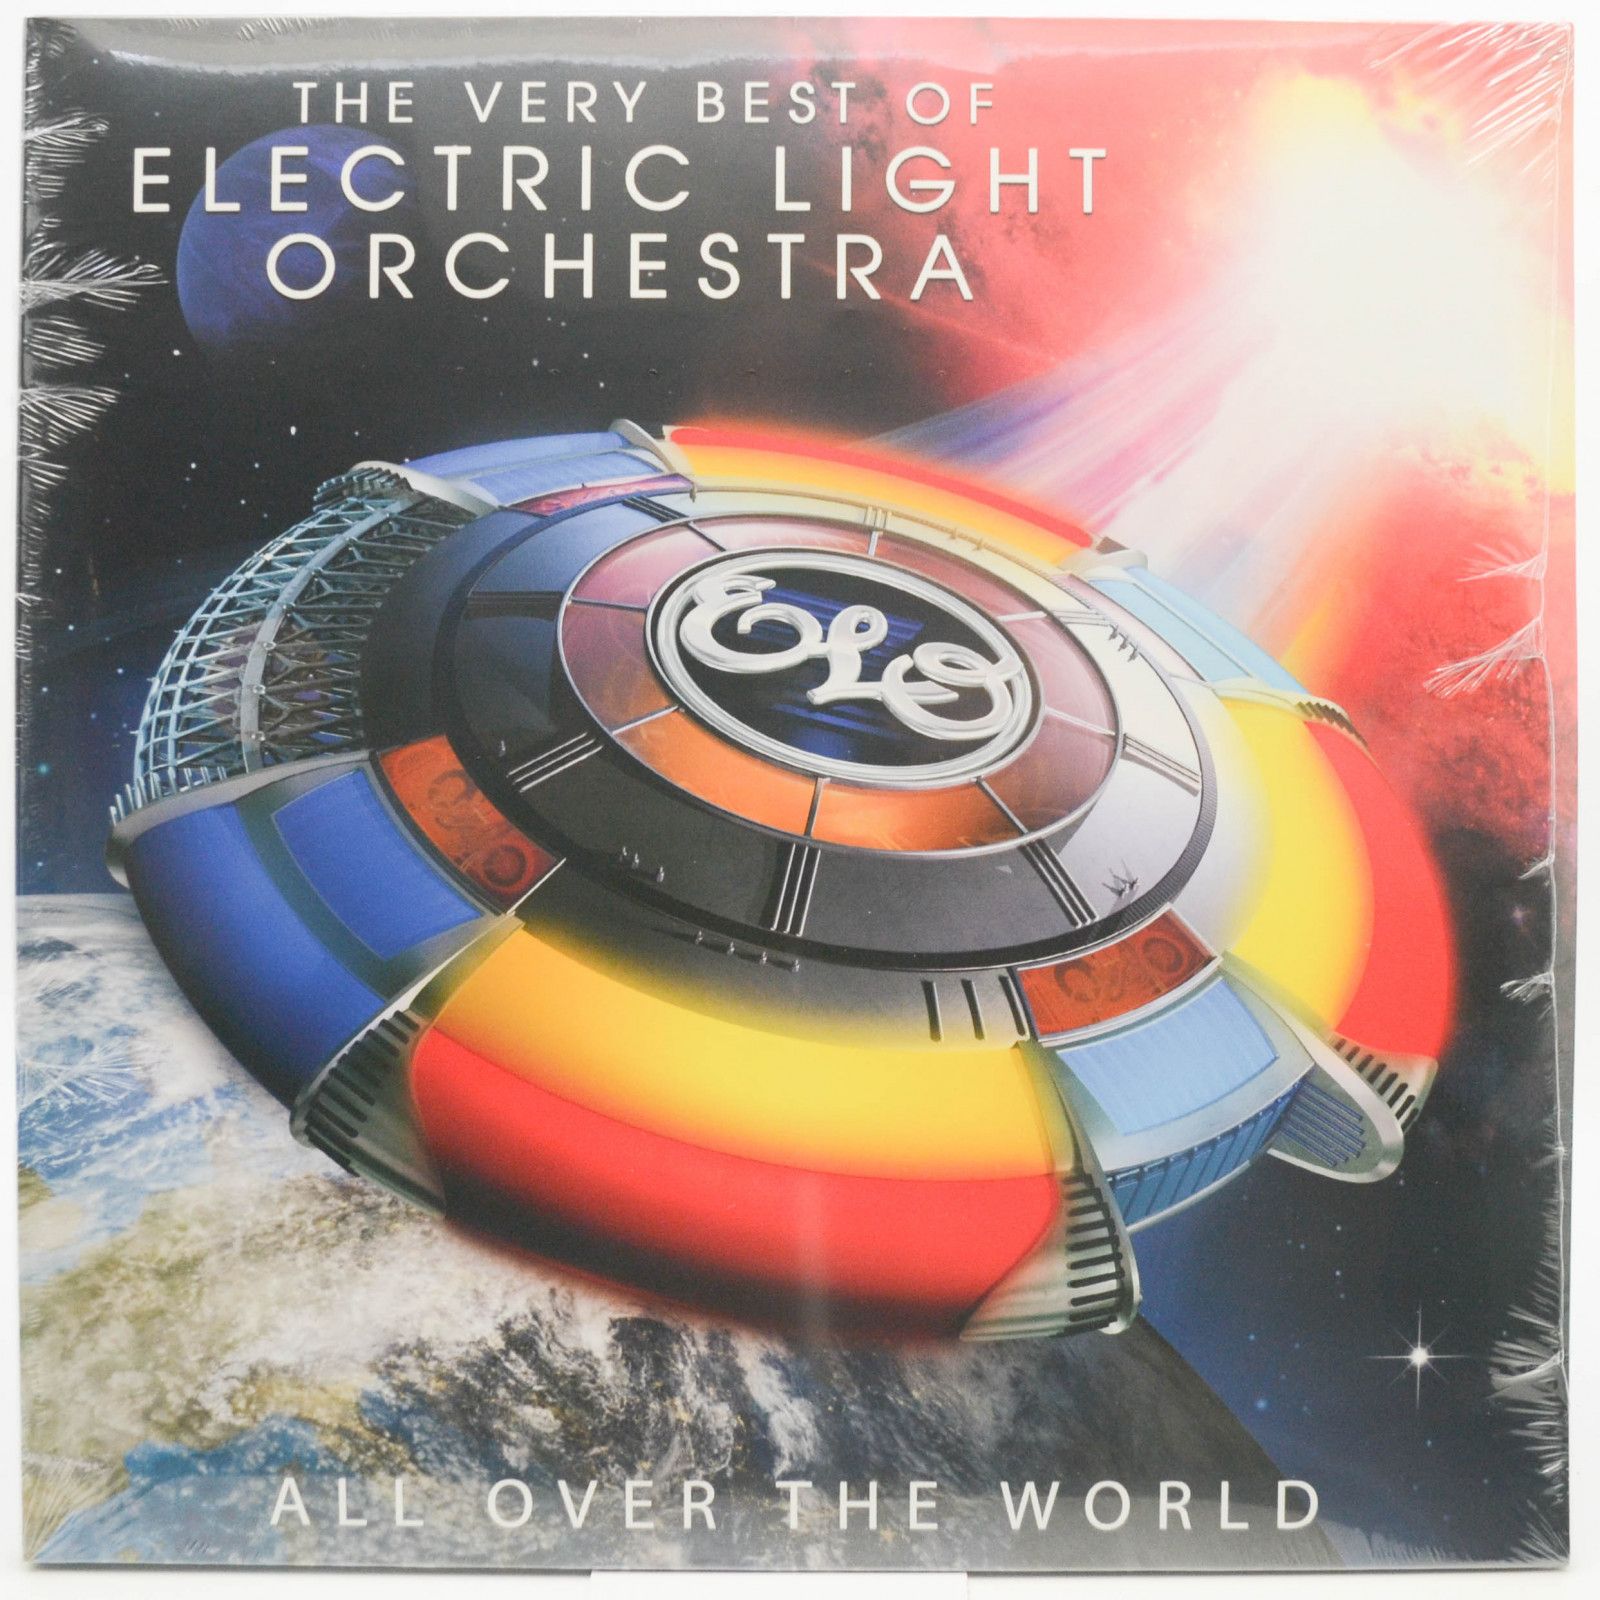 Electric Light Orchestra — All Over The World - The Very Best Of (2LP), 2005